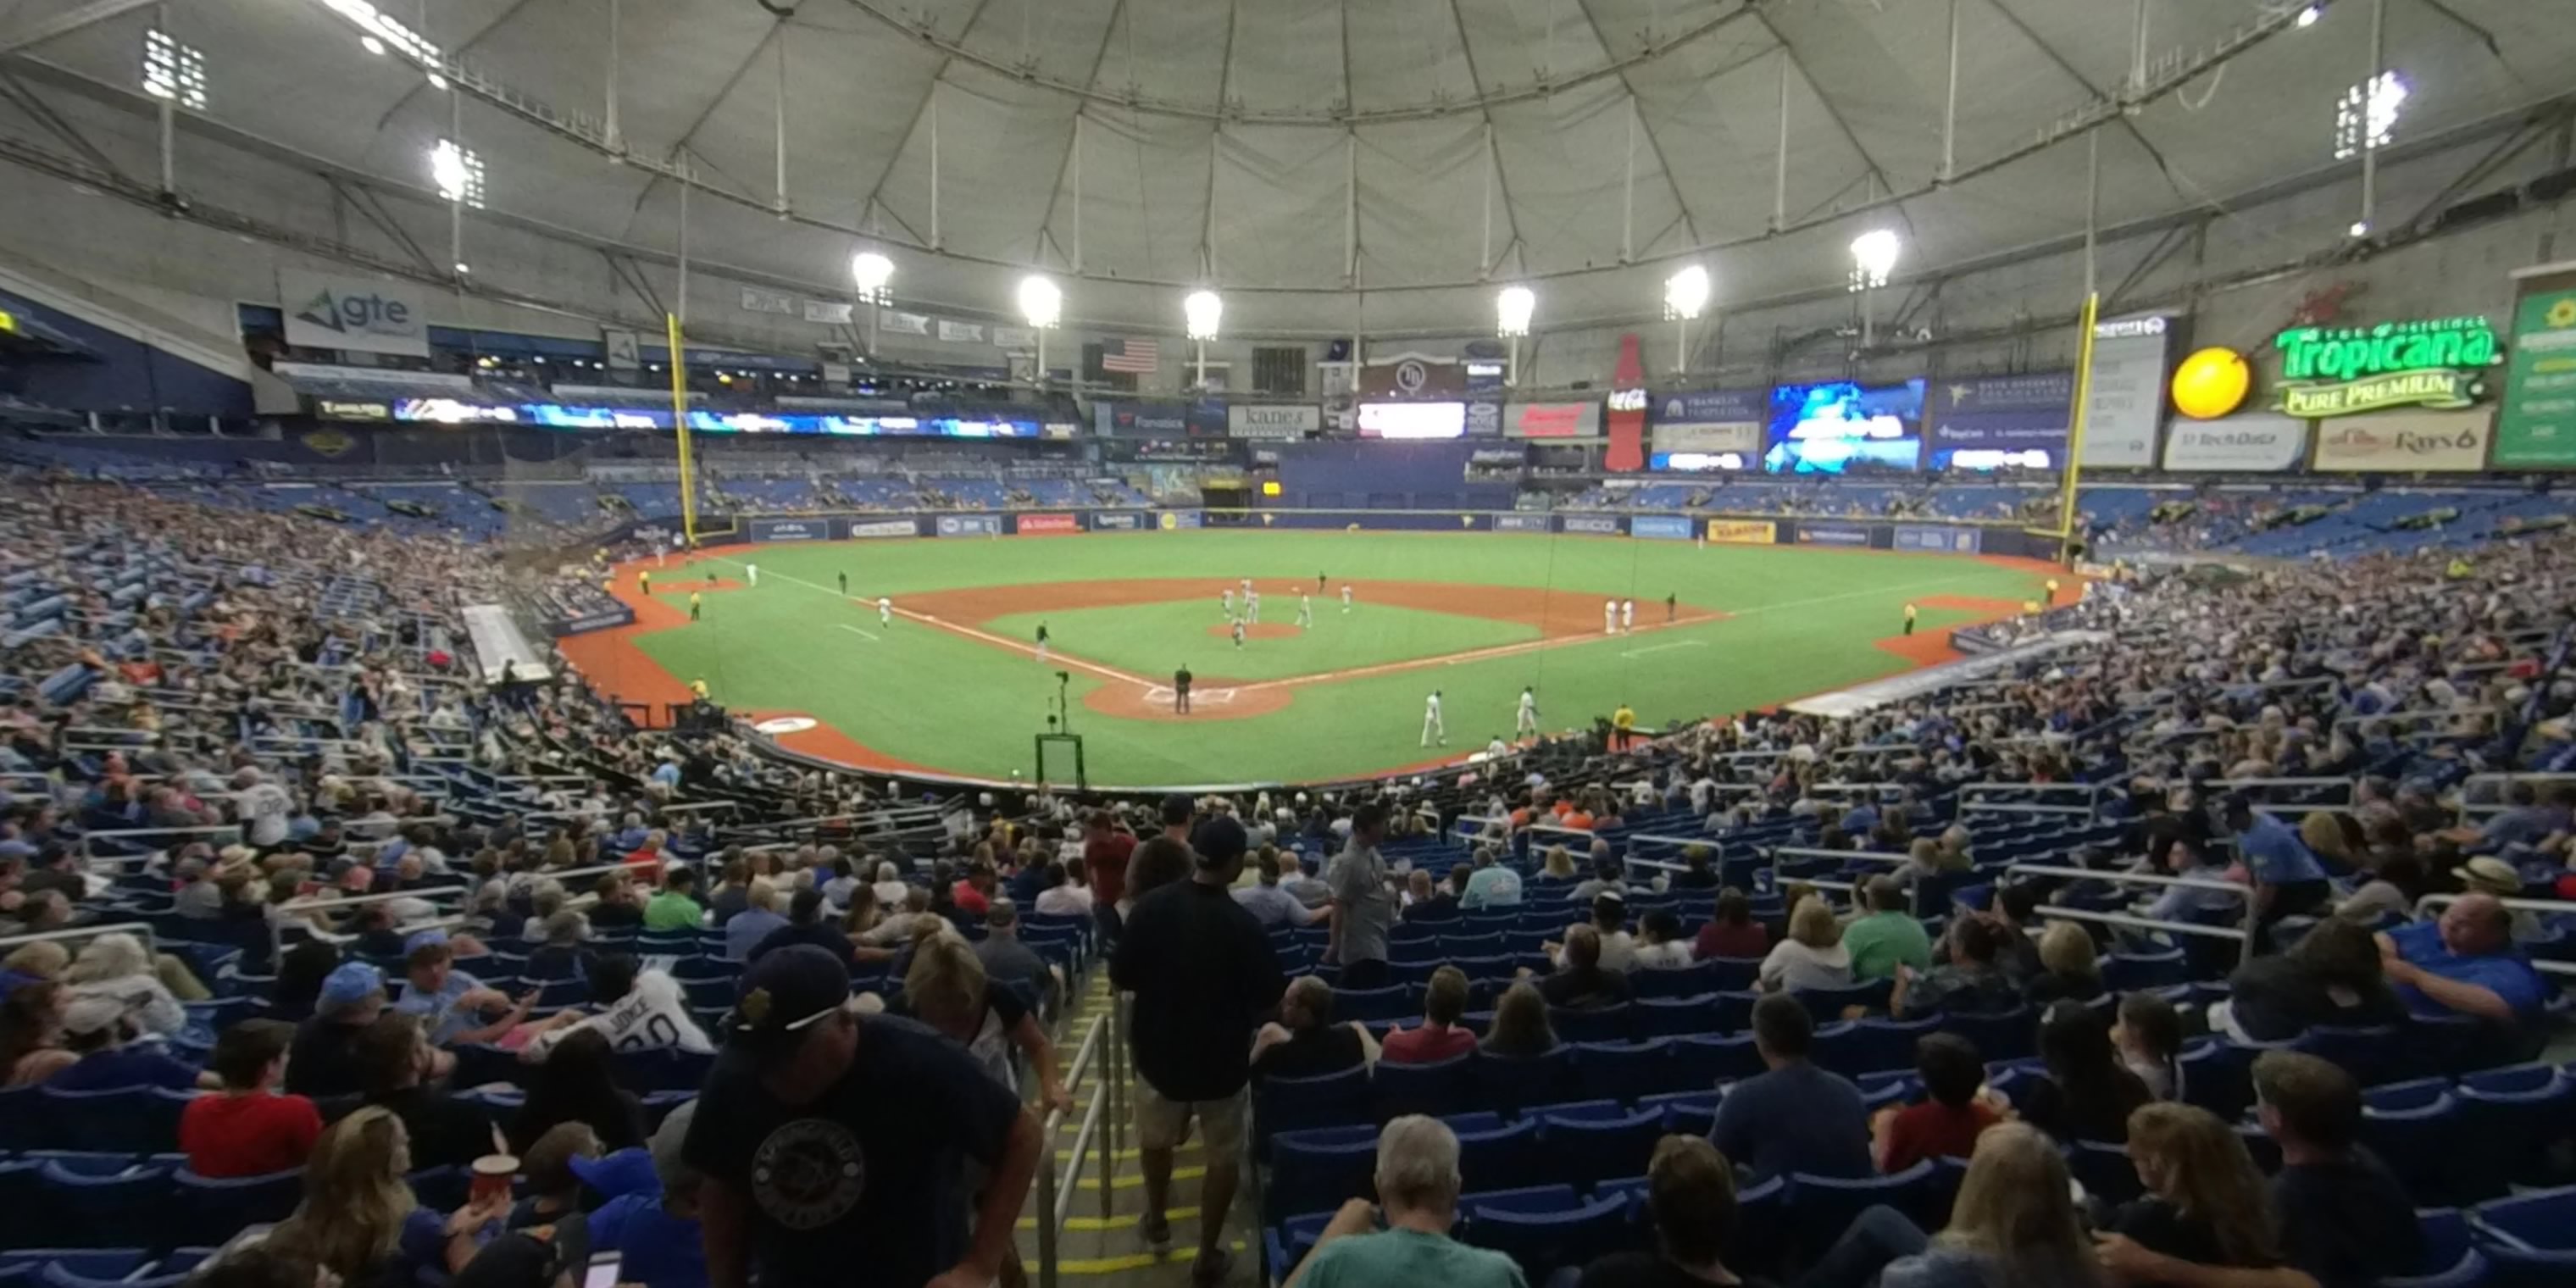 section 104 panoramic seat view  for baseball - tropicana field